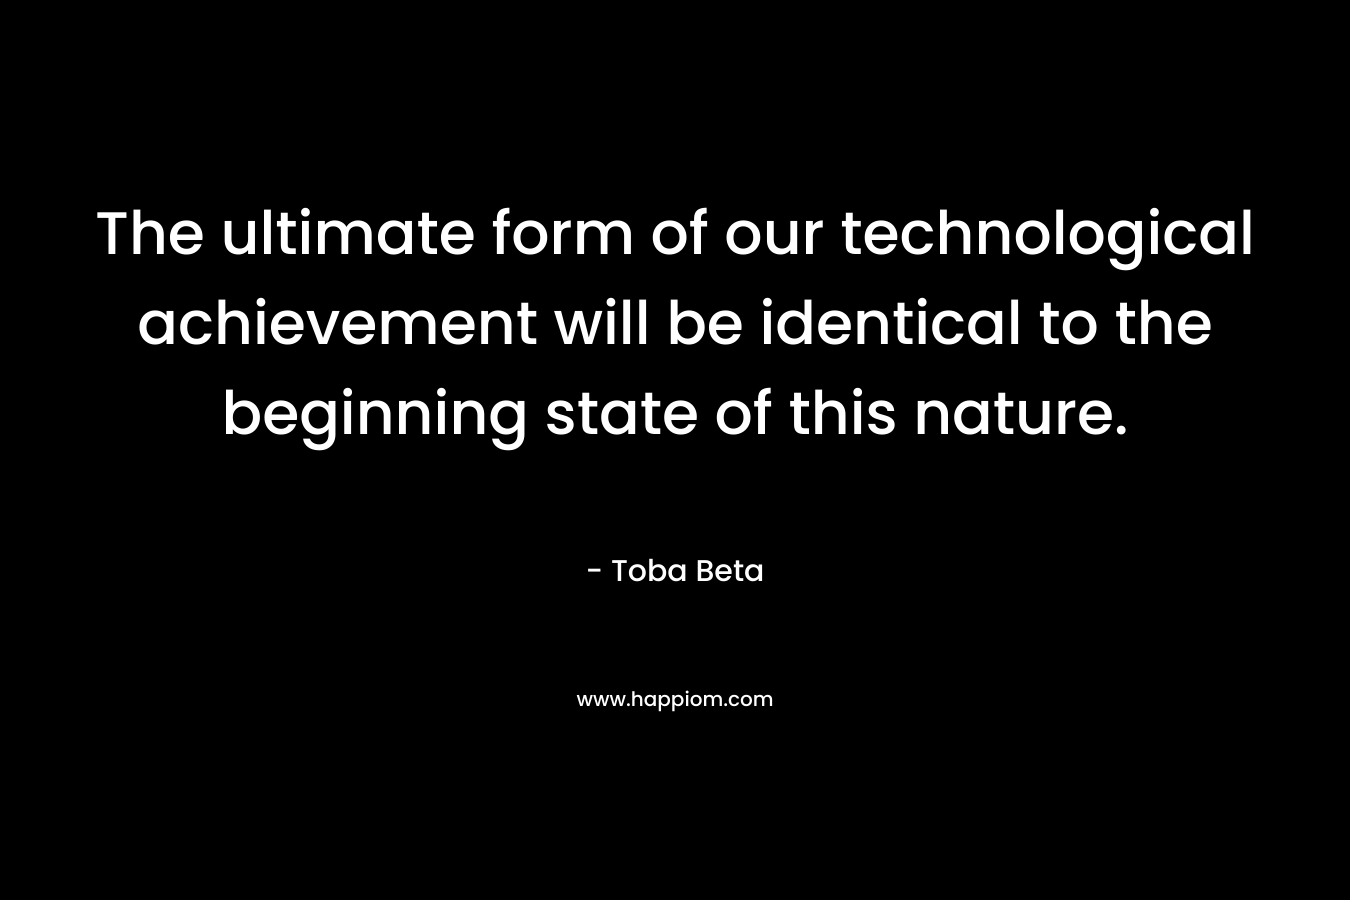 The ultimate form of our technological achievement will be identical to the beginning state of this nature. – Toba Beta